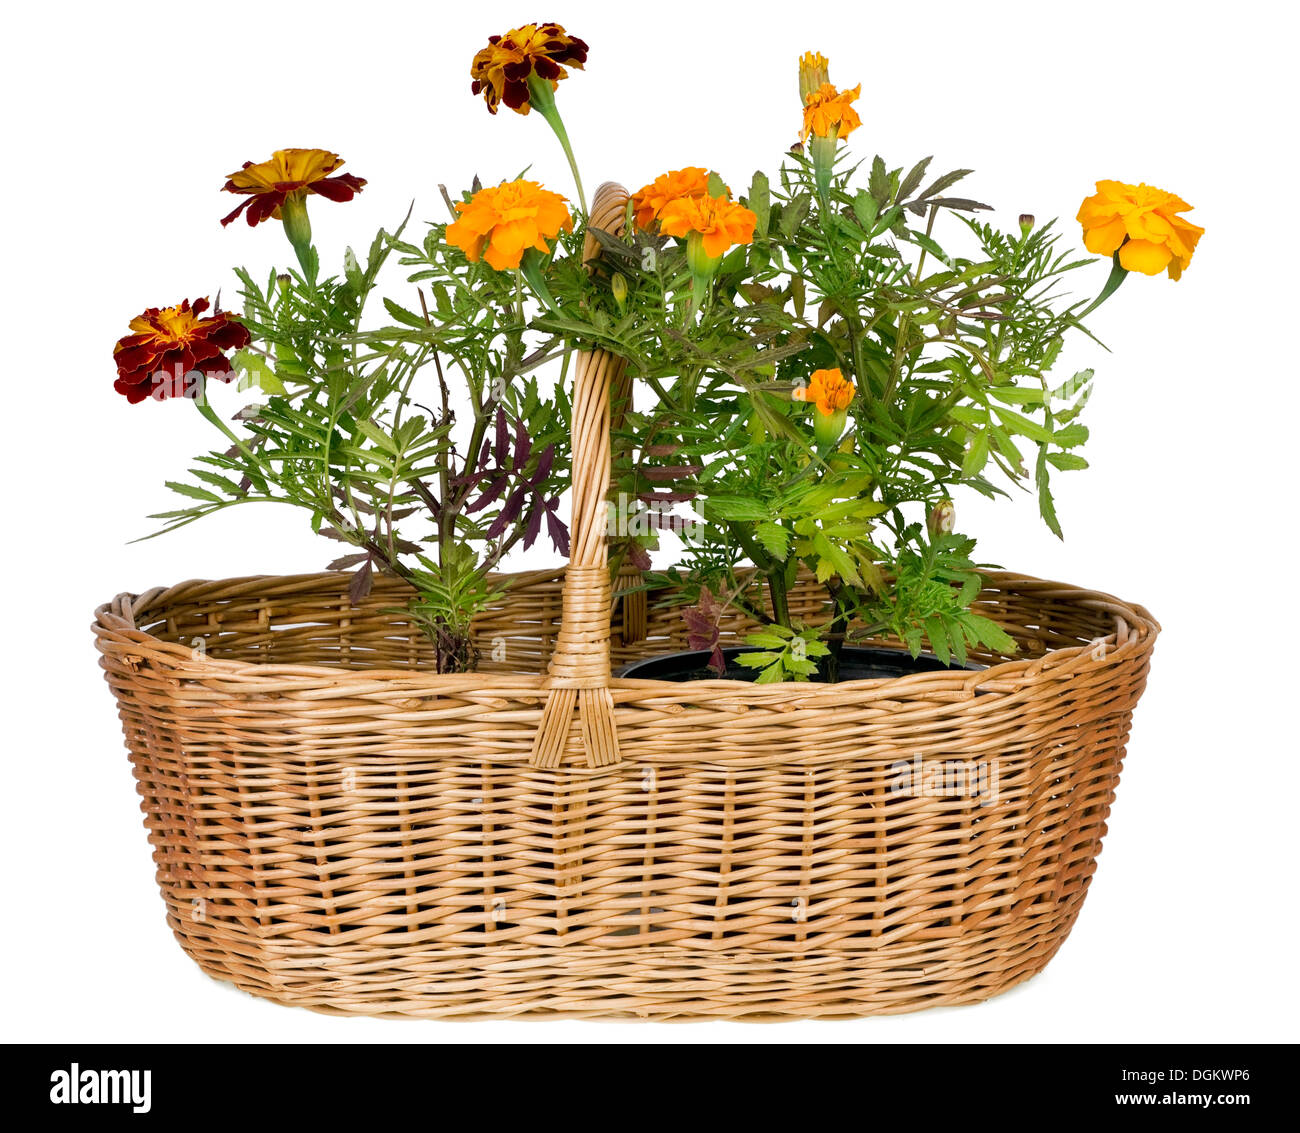 French golden marigolds of Montmartre concept isolated. Flowers in wicker basket Stock Photo